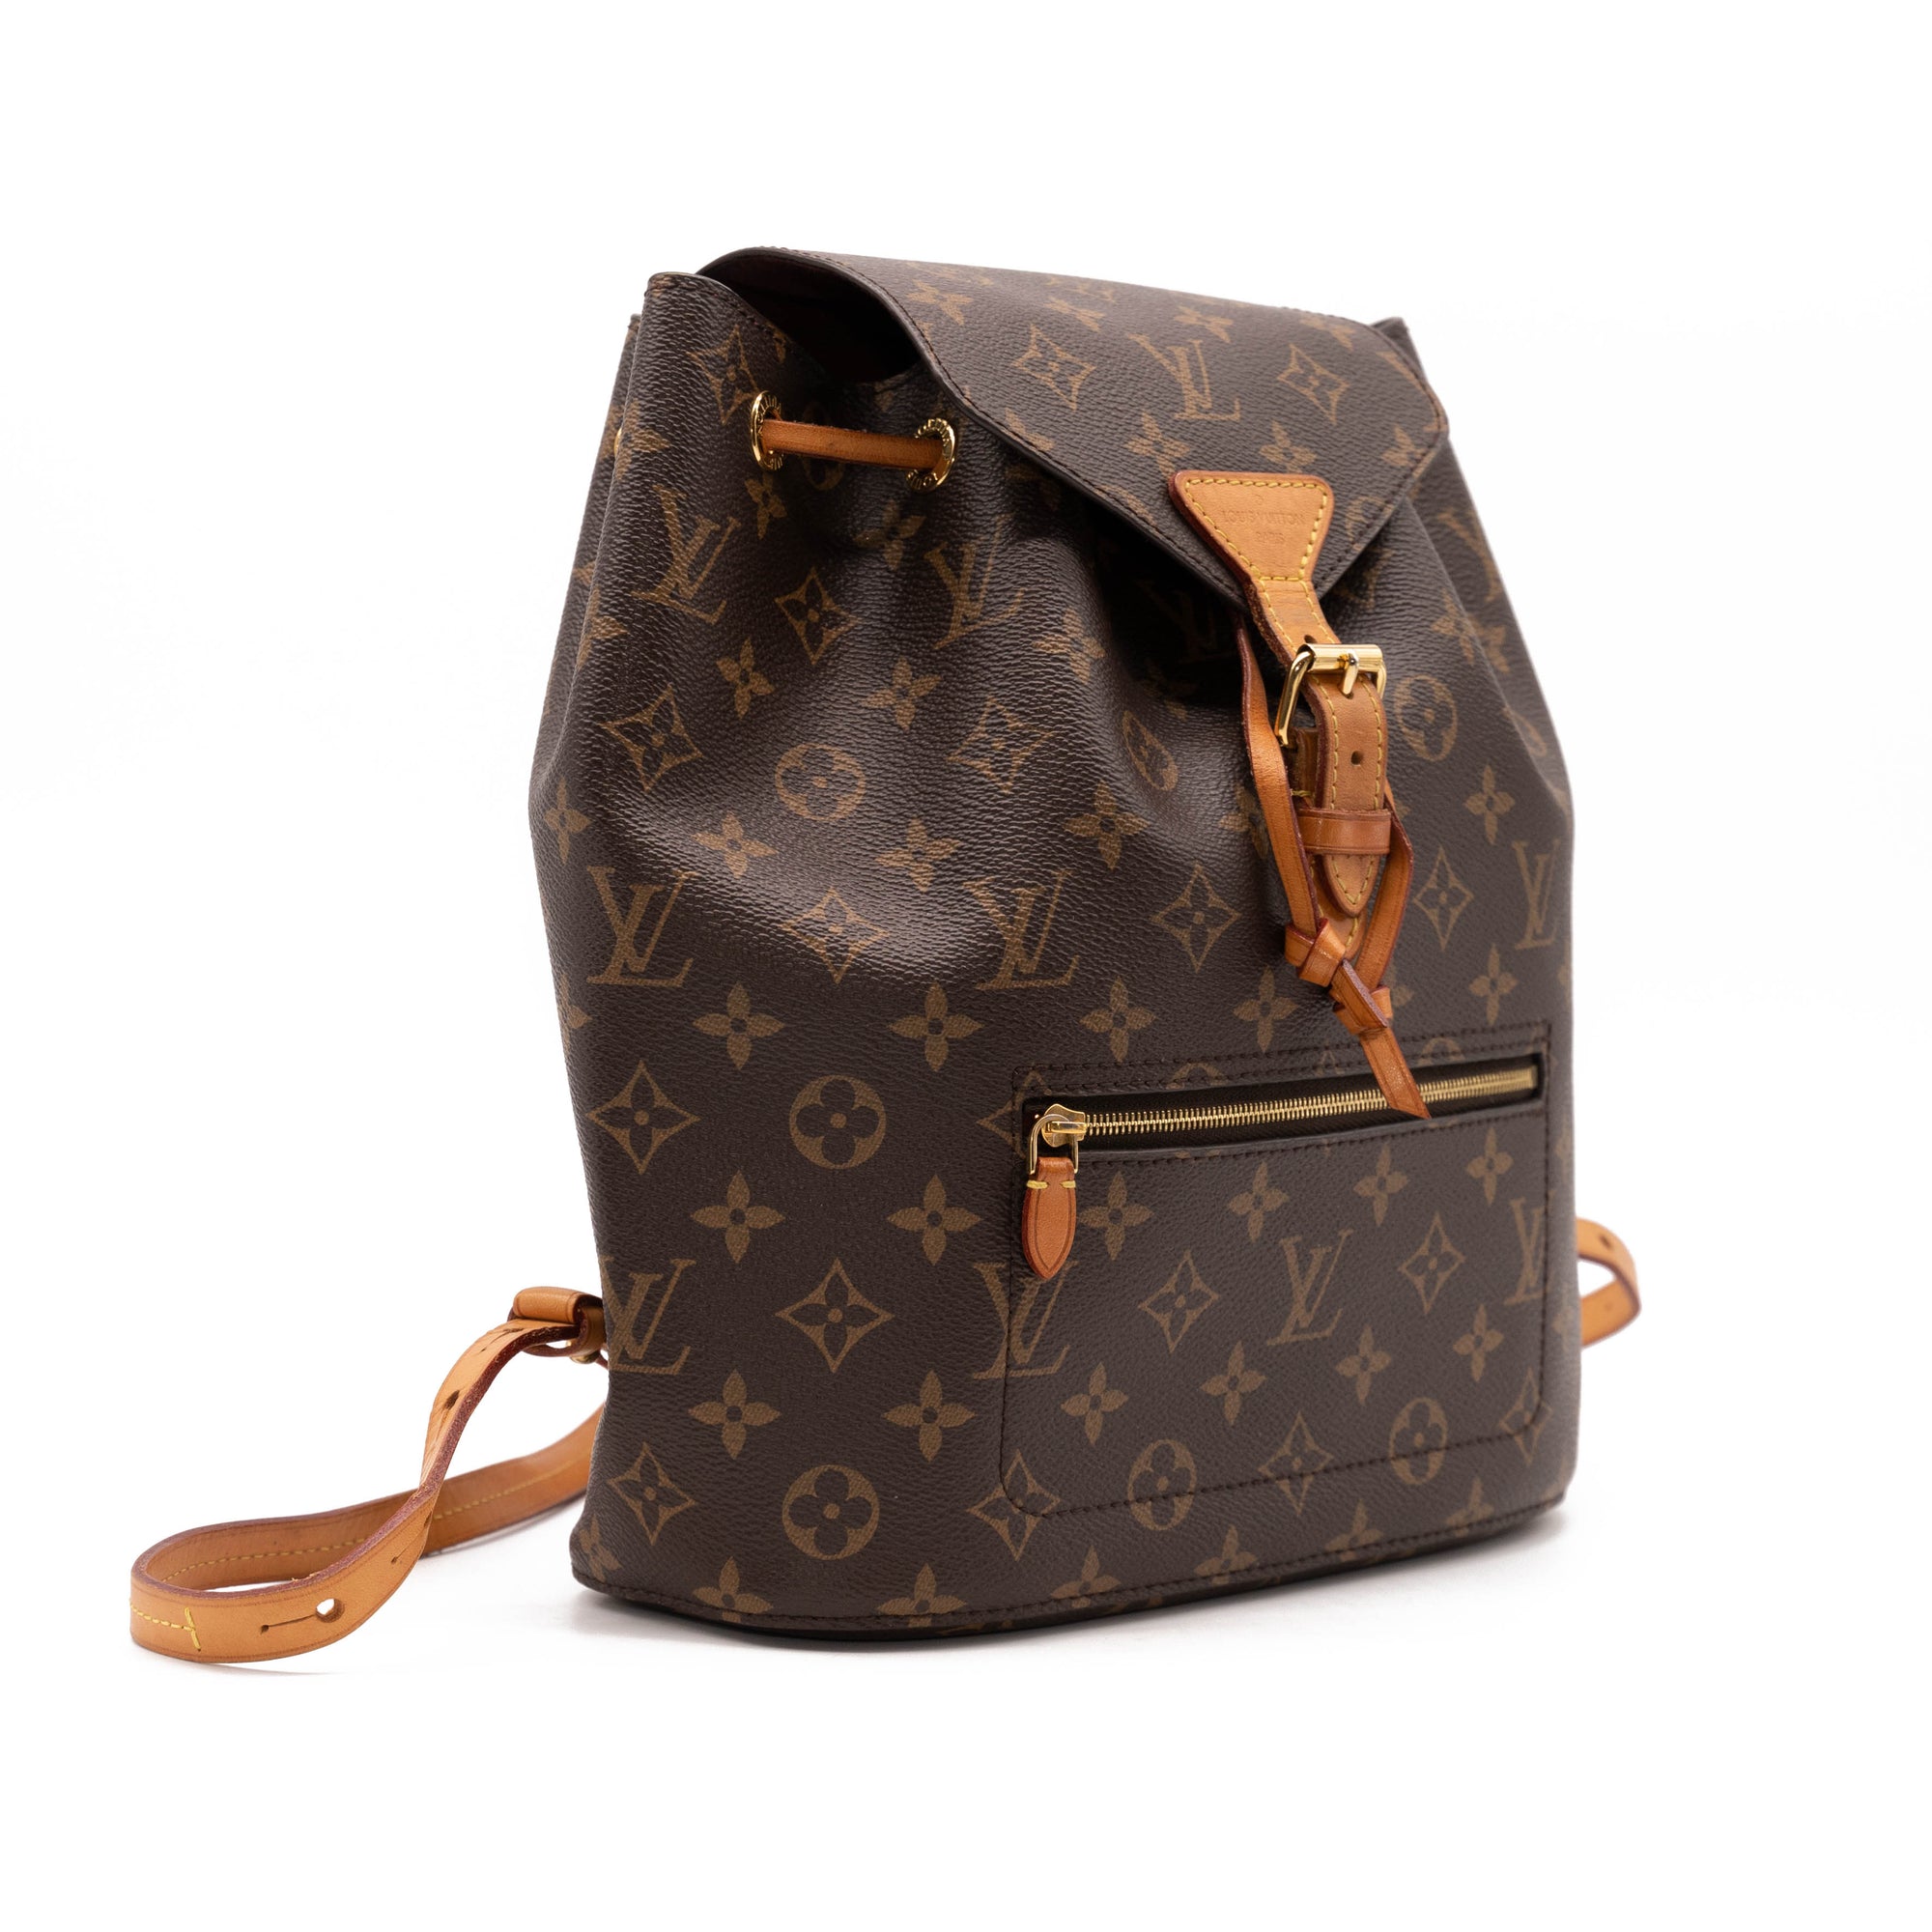 LOUIS VUITTON Monogram Montsouris MM Backpack - More Than You Can